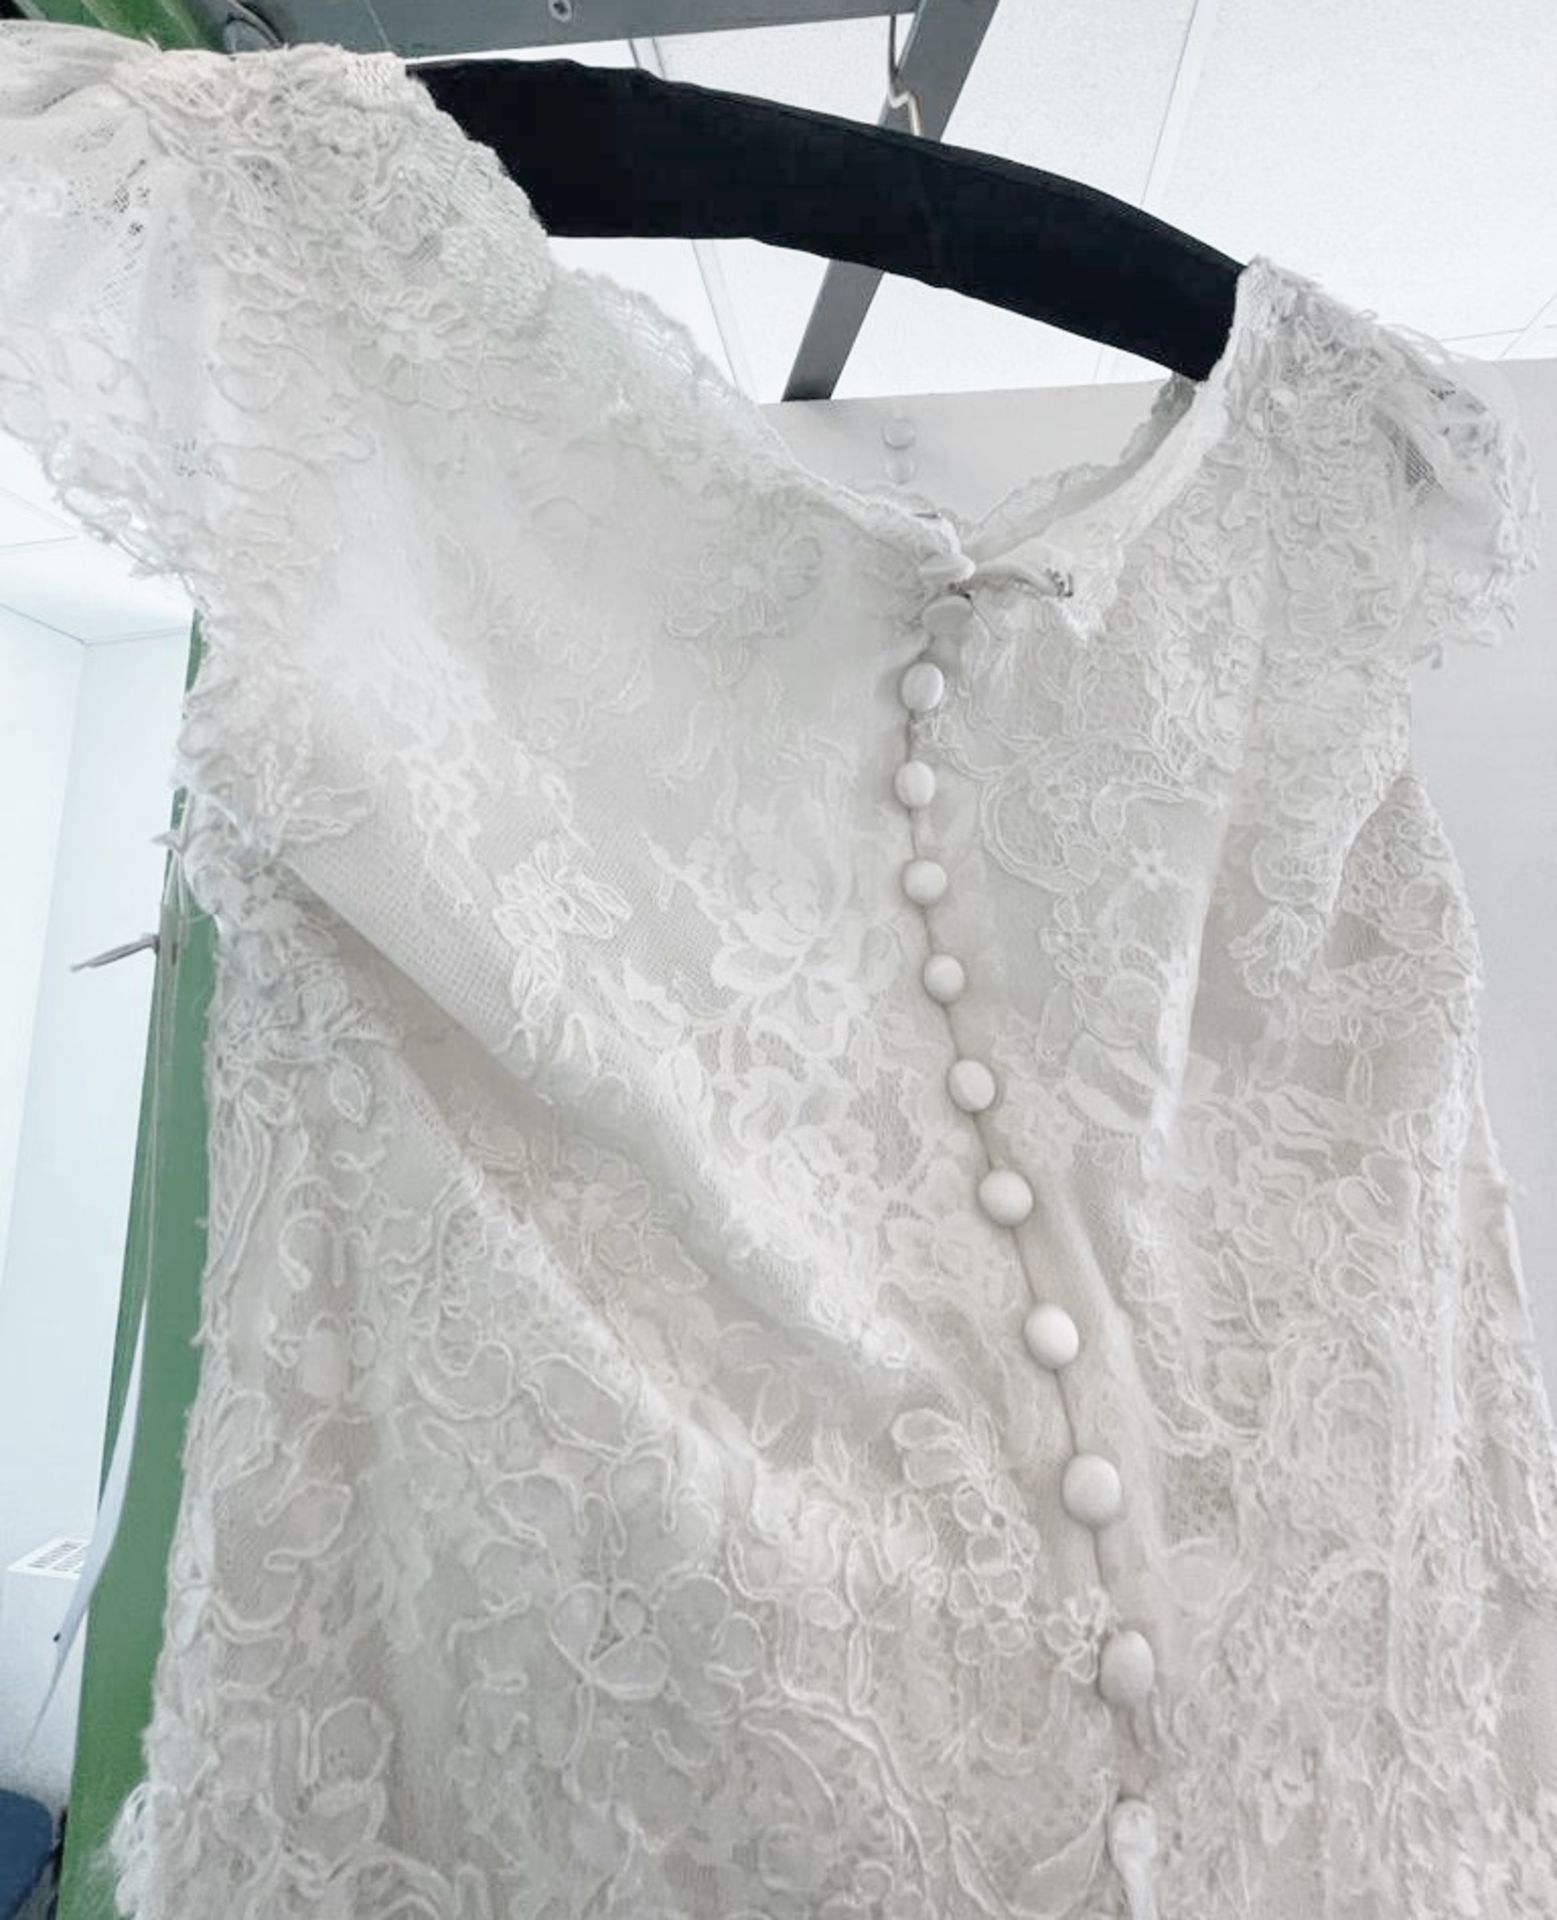 1 x LUSAN MANDONGUS 'Tabia' Fishtail Designer Wedding Dress Bridal Gown, With Chantilly Lace - Image 5 of 15